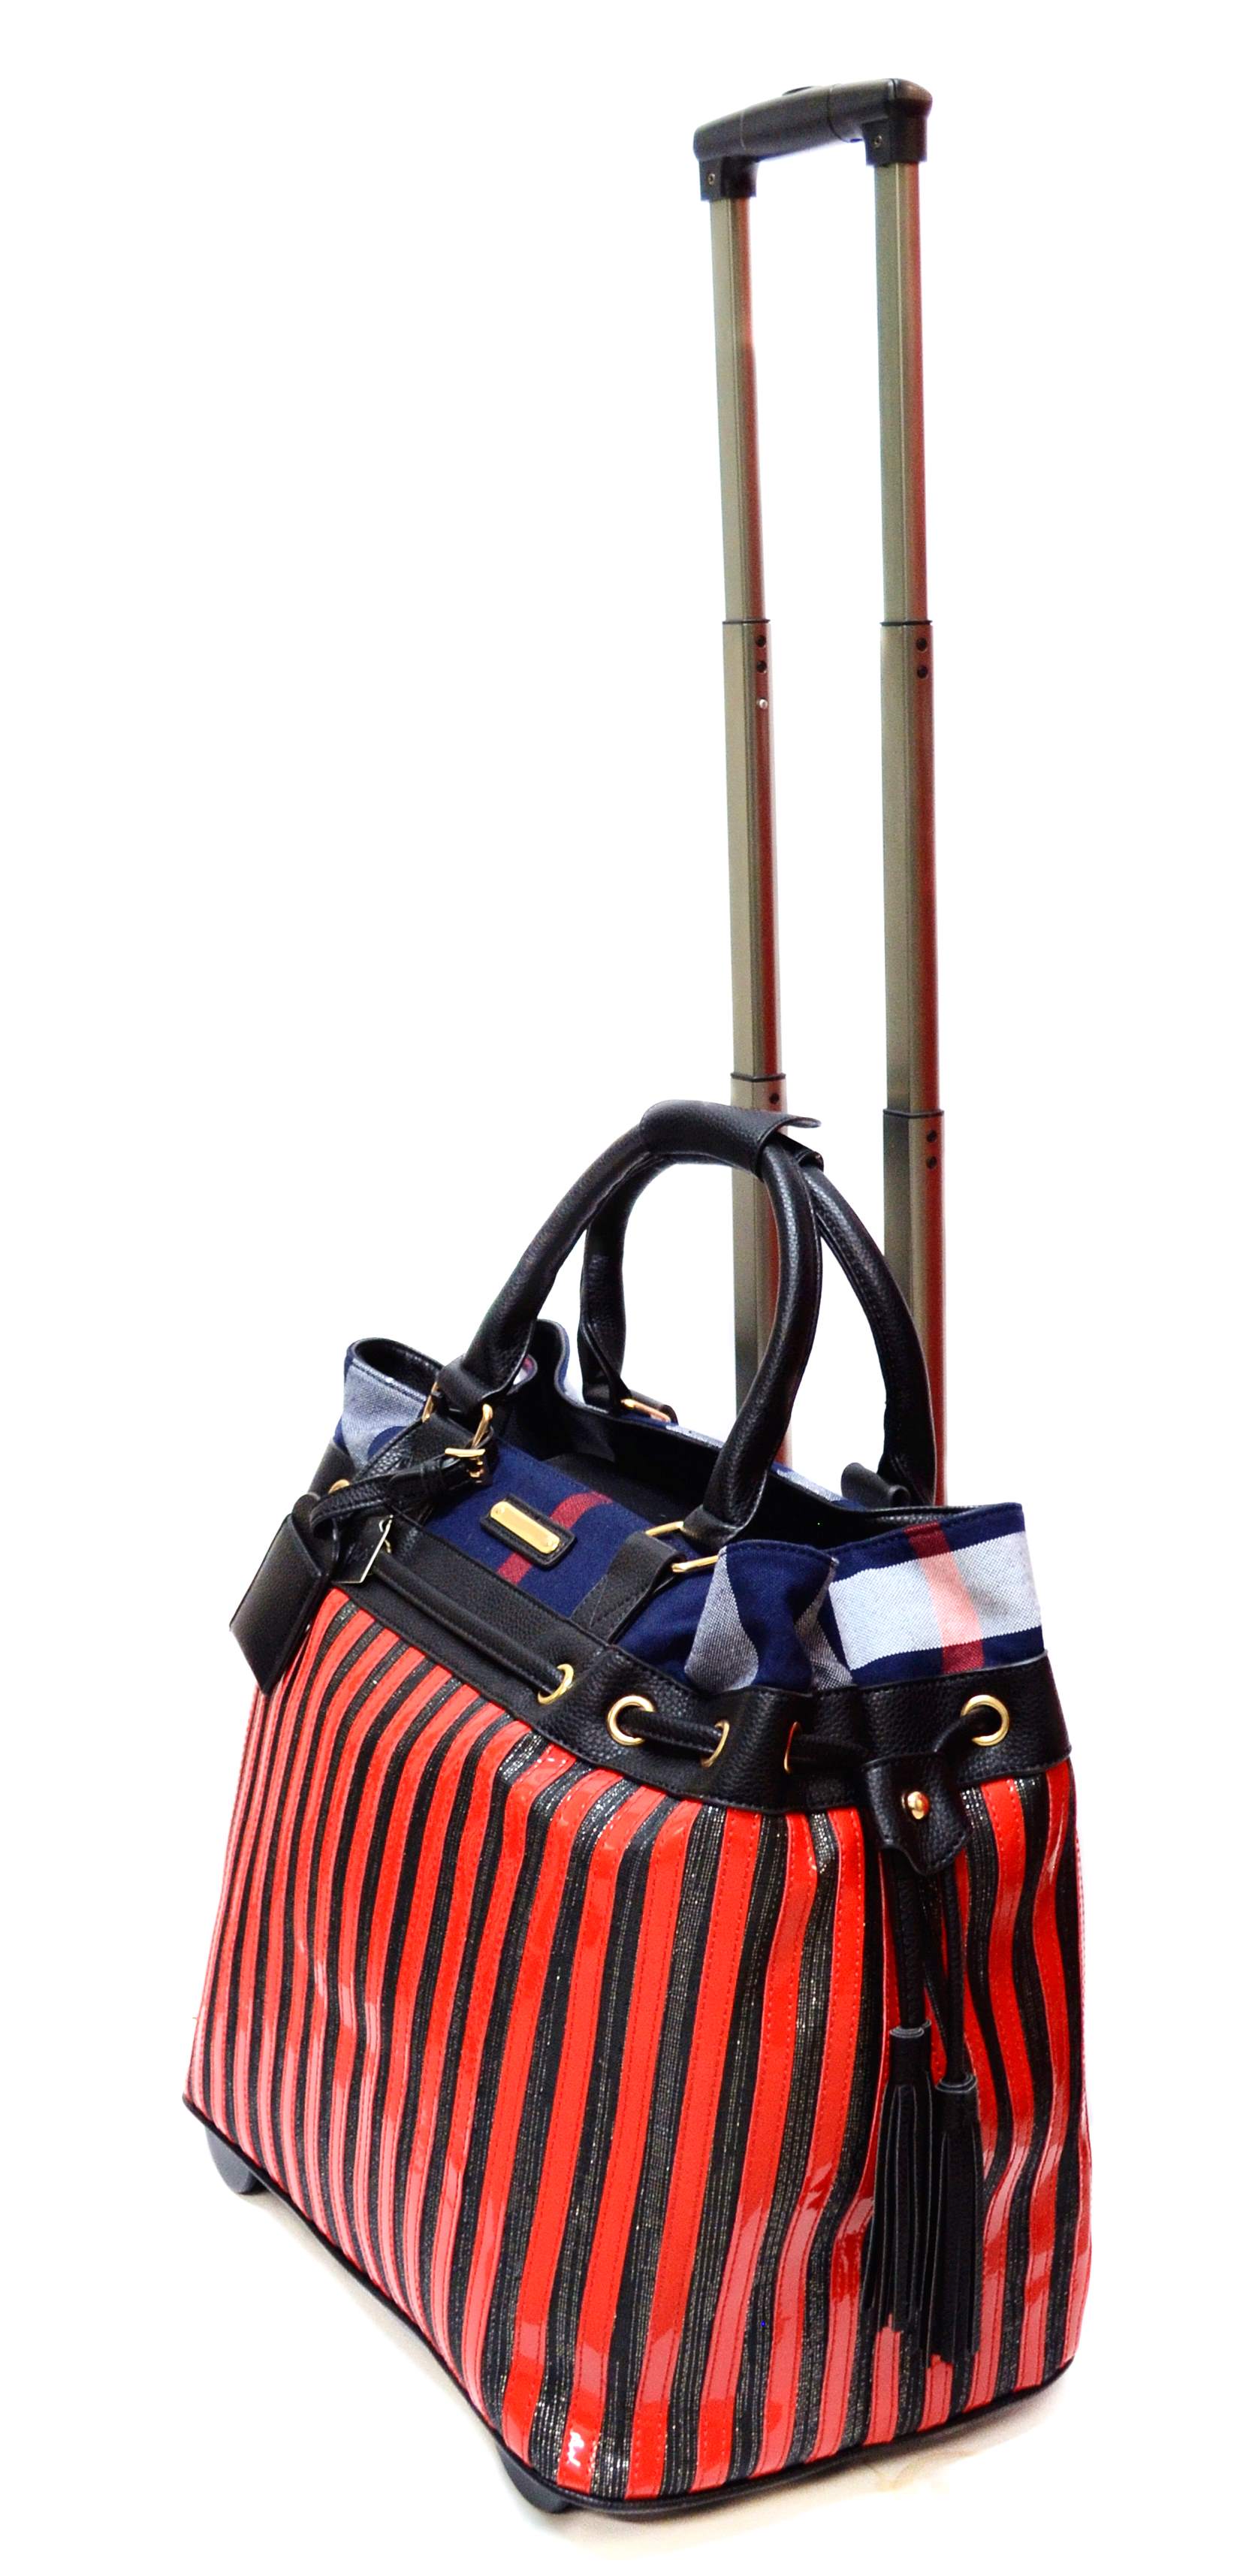 travel bag with compartments